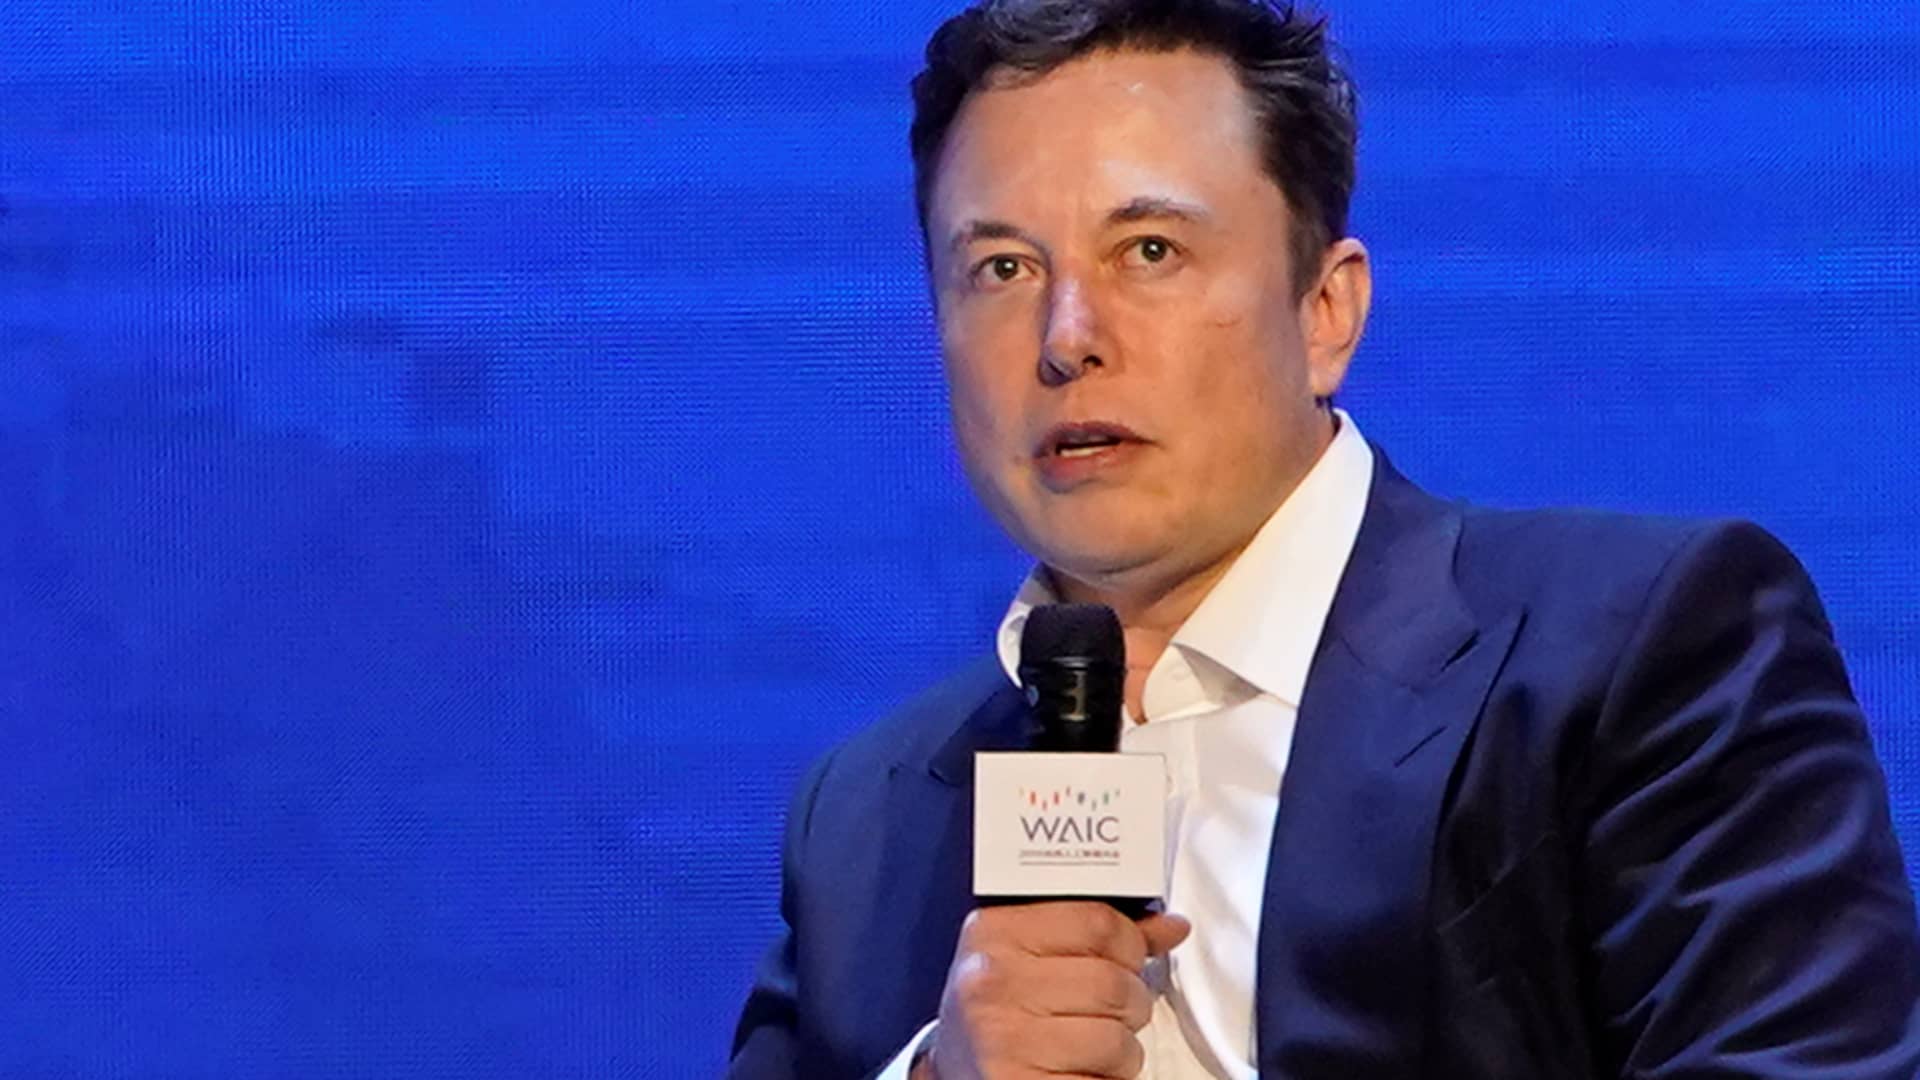 Musk says Twitter board will be paid nothing if he acquires the company